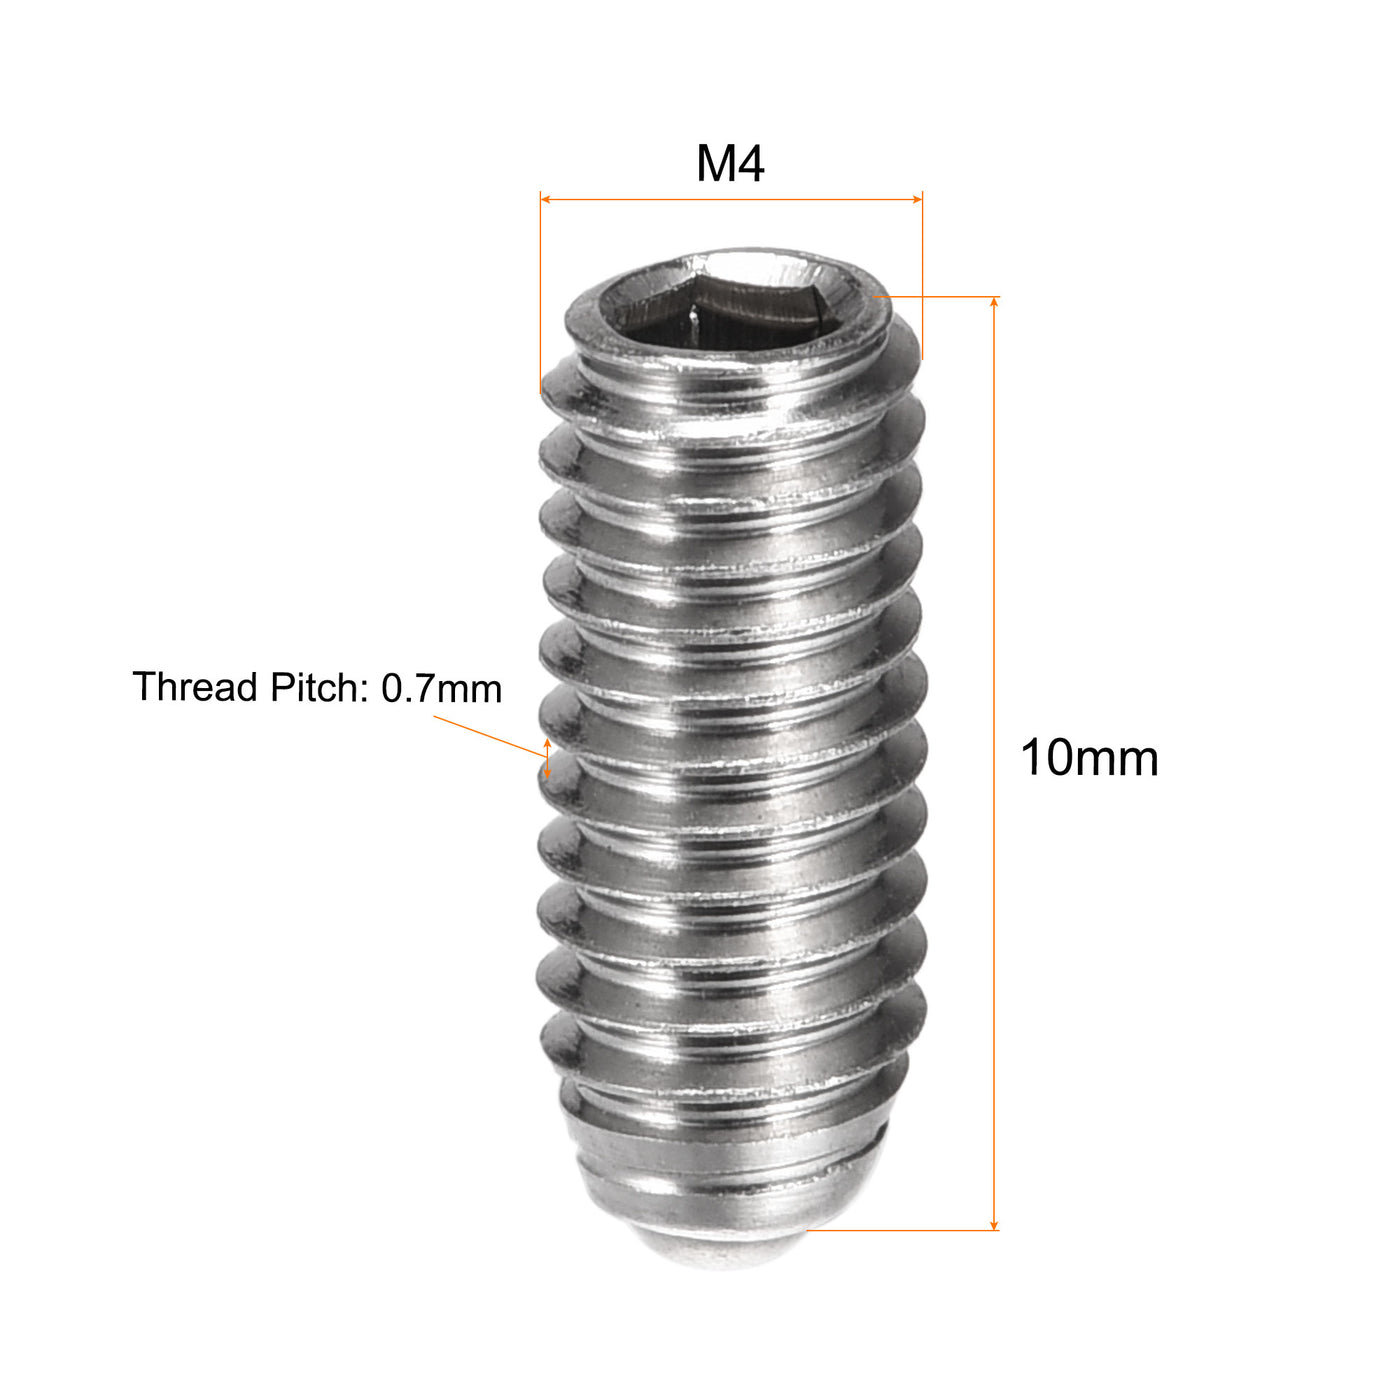 uxcell Uxcell M6 x 12mm 304 Stainless Steel Spring Hex Socket Ball Point Set Screws 20pcs